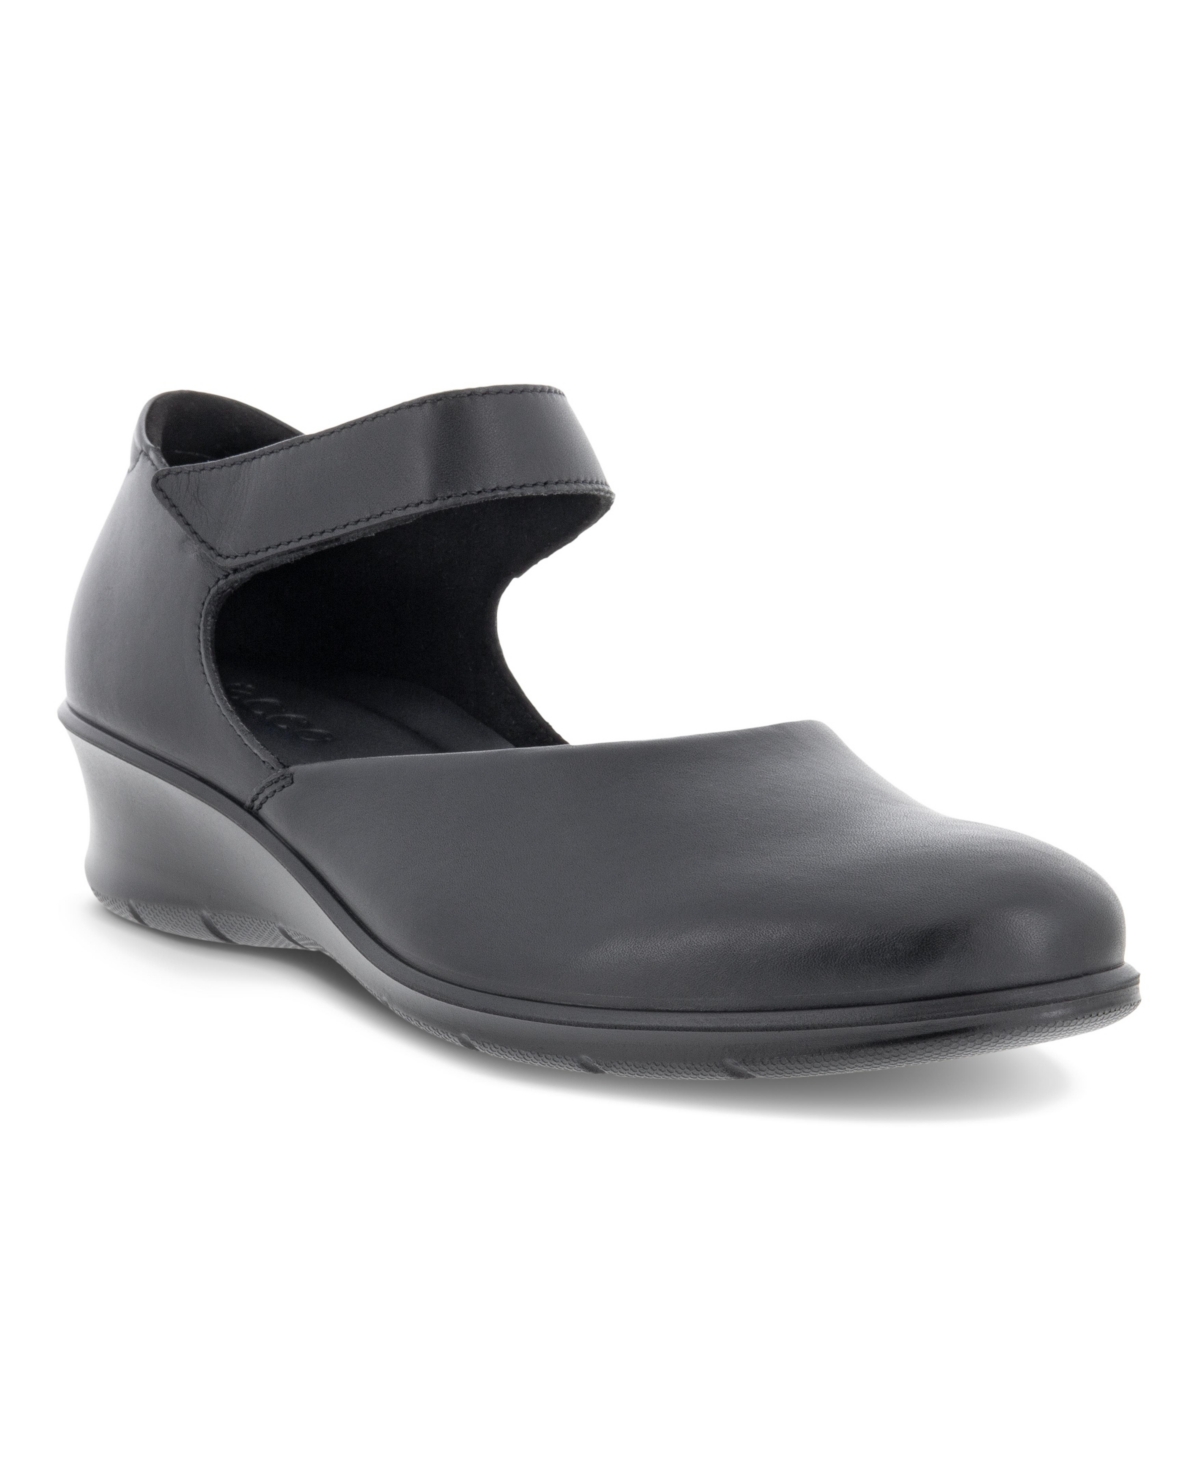 UPC 194891095686 product image for Ecco Women's Felicia Mary Jane Flats Women's Shoes | upcitemdb.com